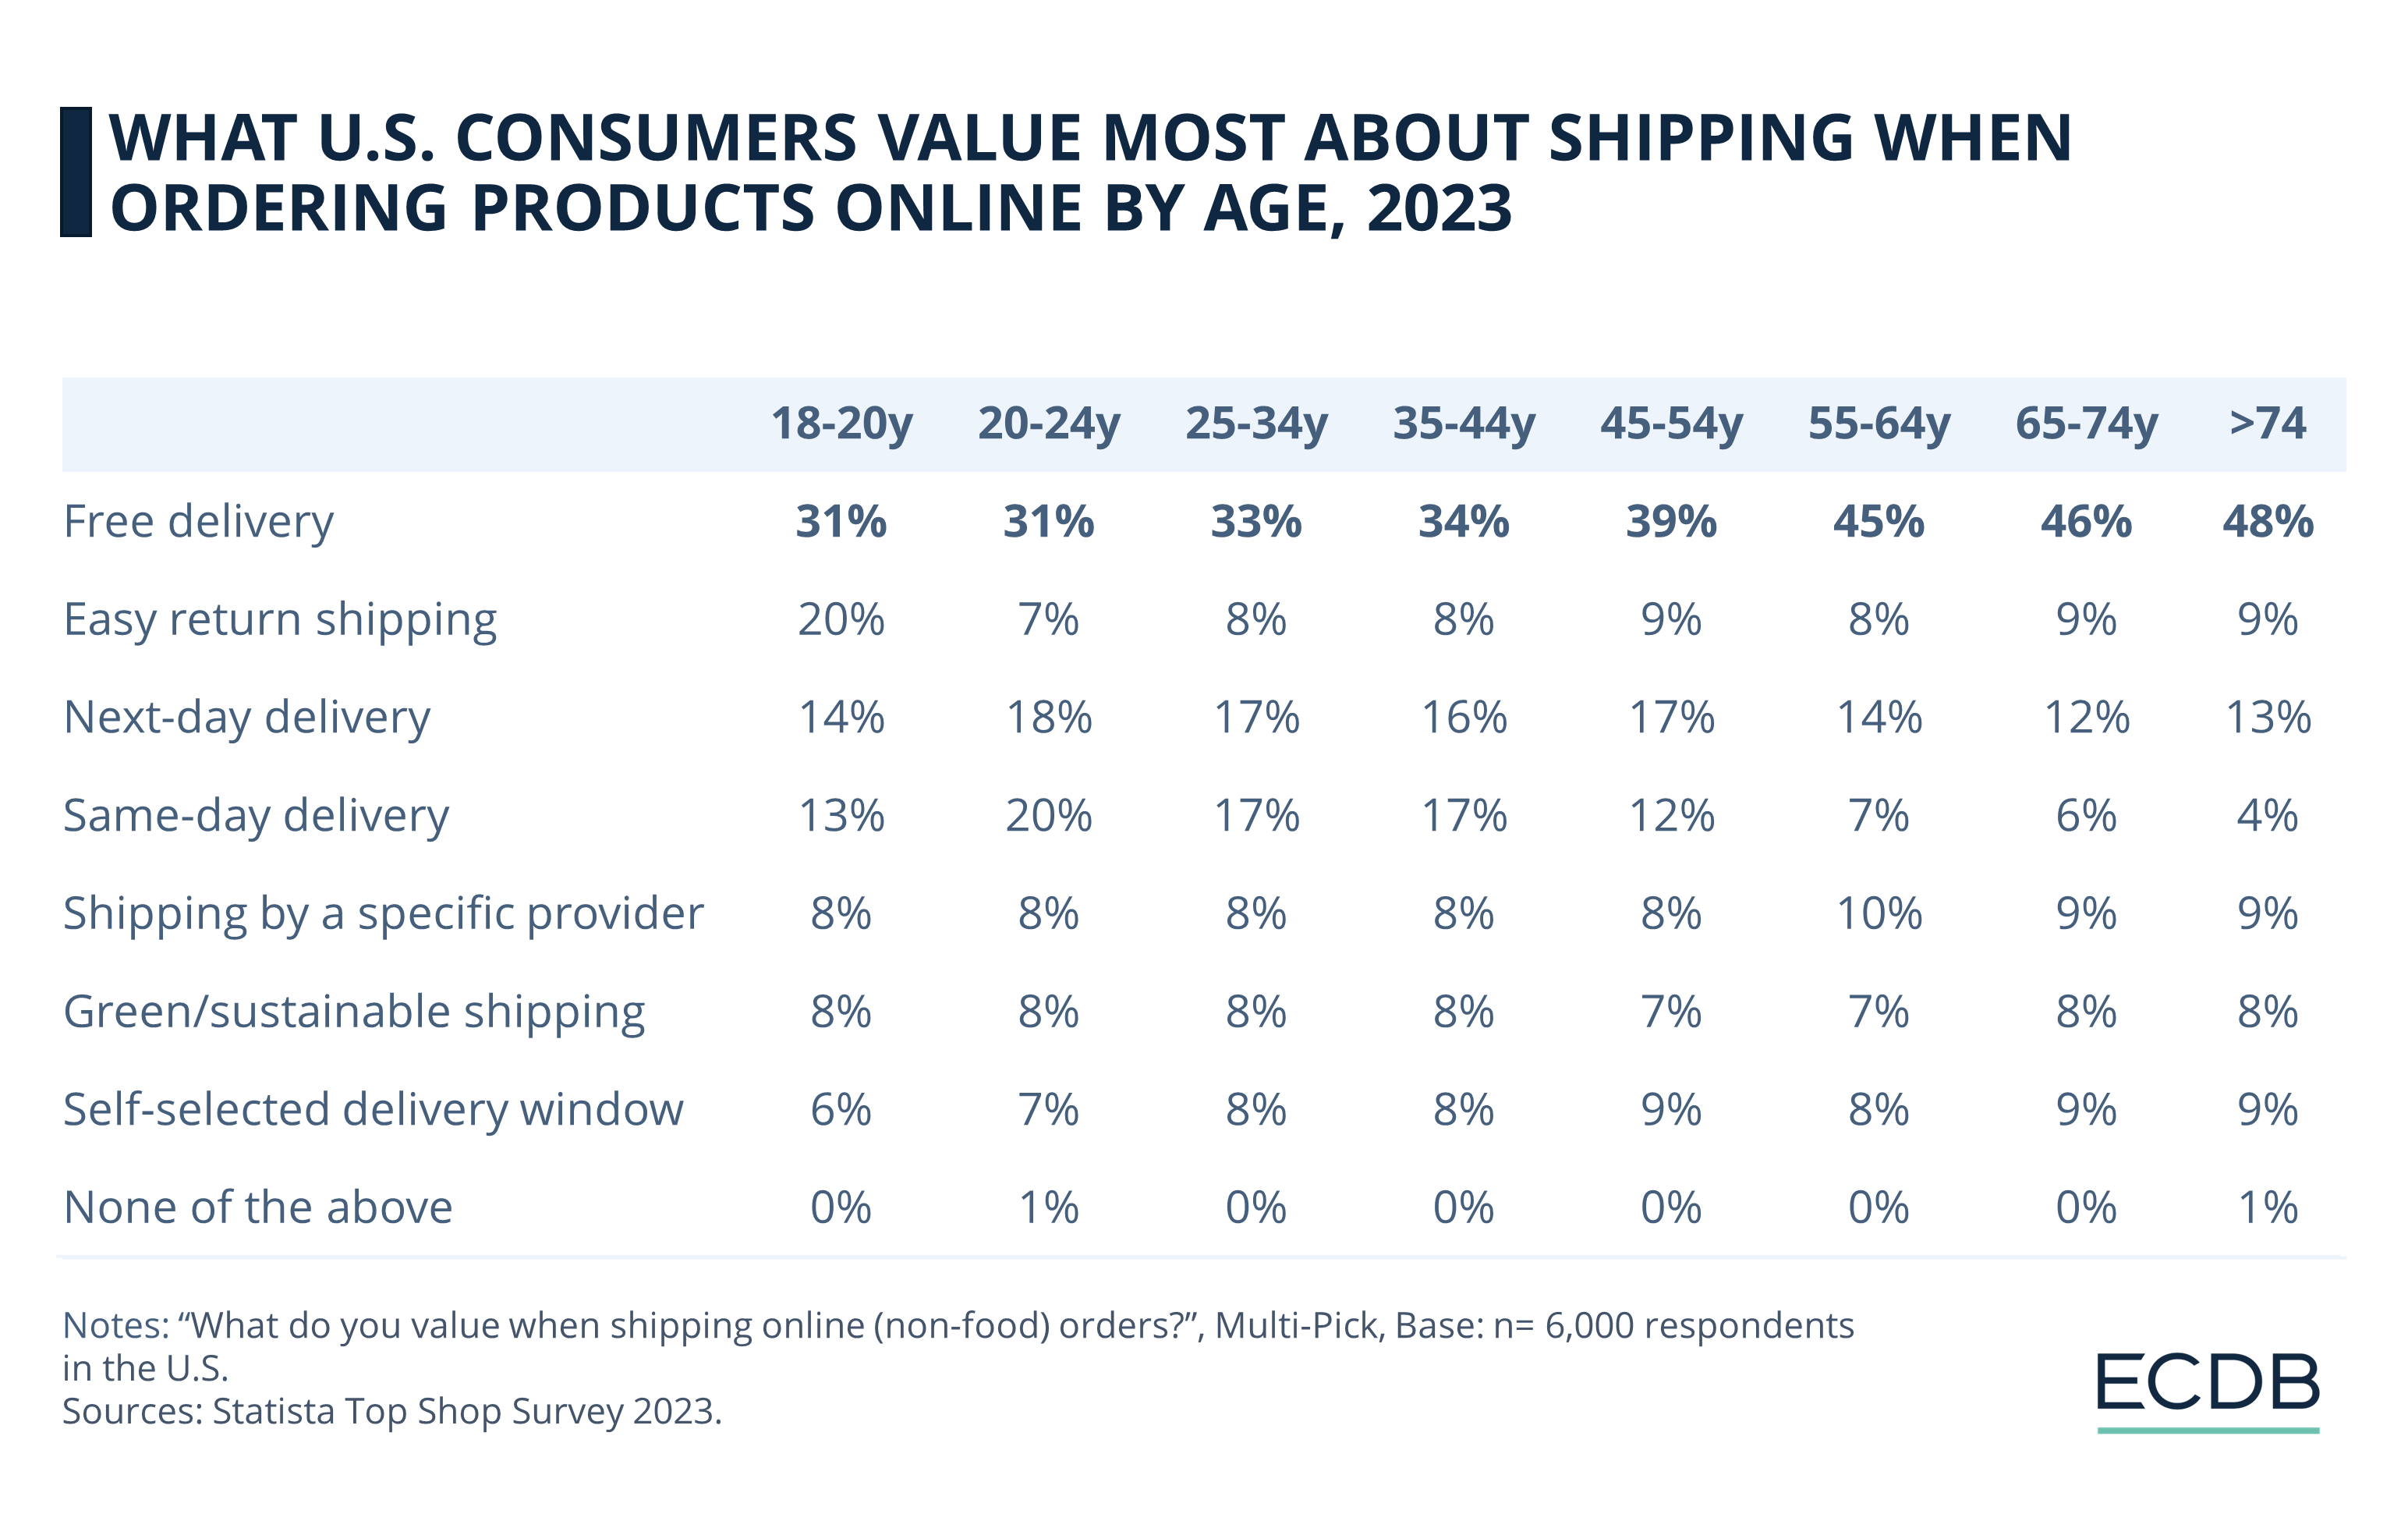 What U.S. Consumers Value About Shipping When Ordering Products Online by Age, 2023